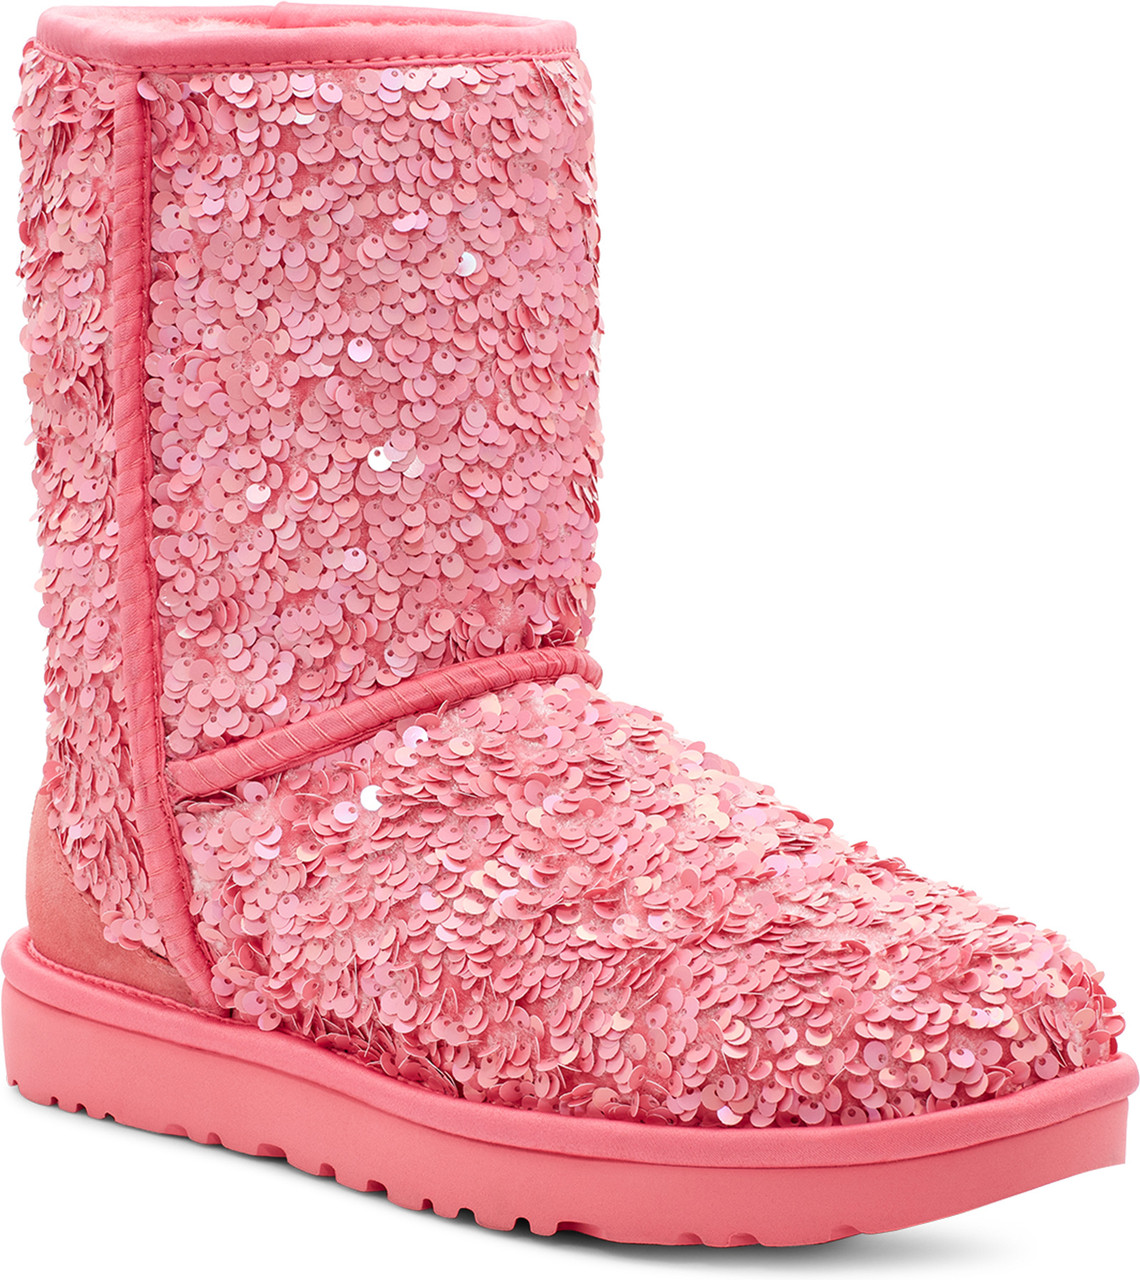 UGG Classic Short Sequin Pink Boots - Women's – MyCozyBoots